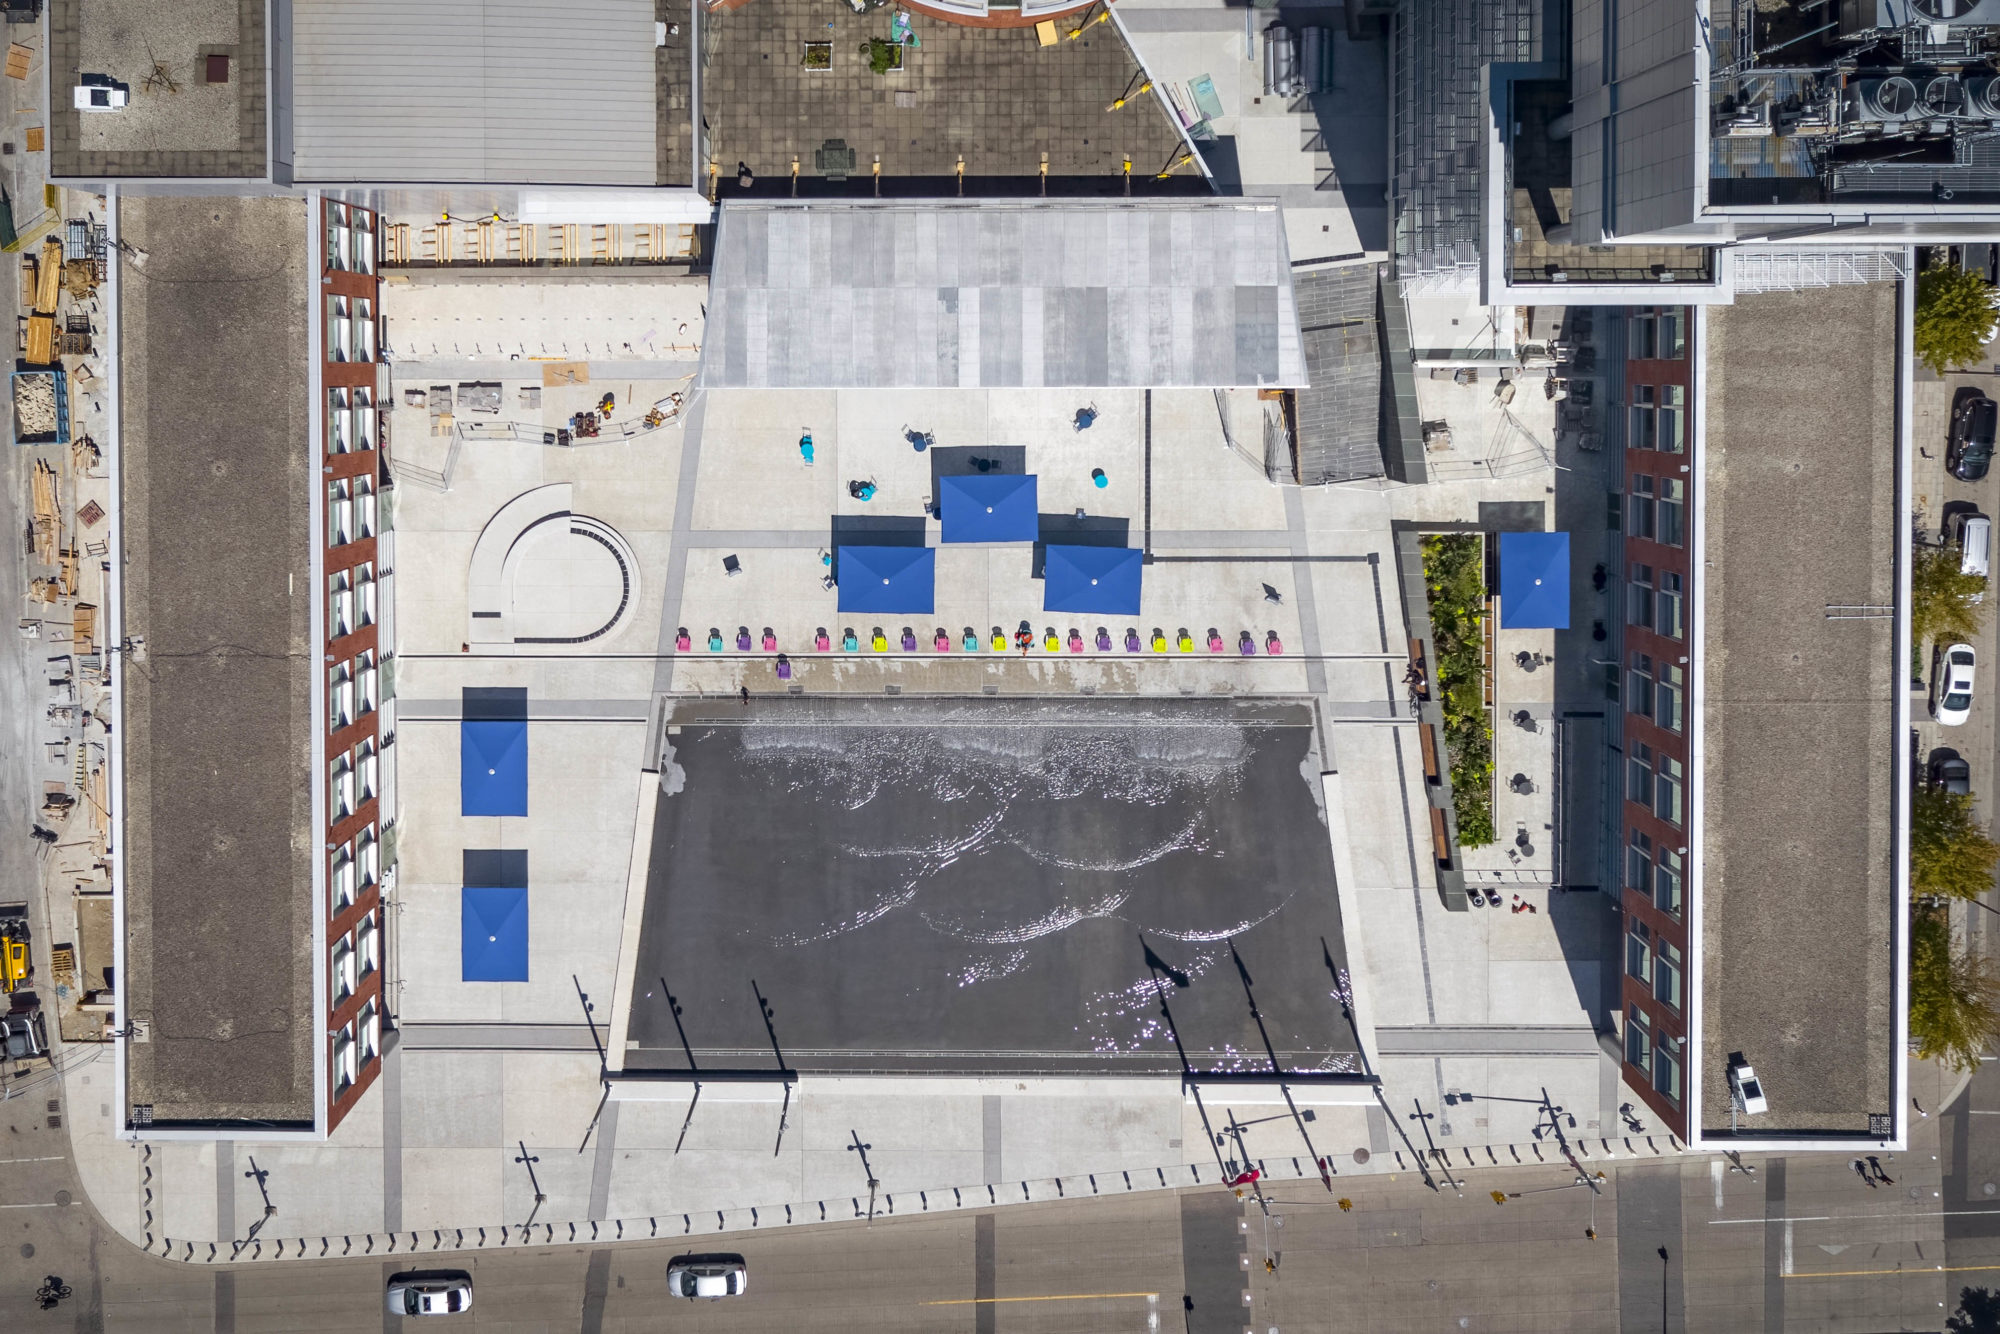 Aerial view of Kitchener City Hall Outdoor spaces with a water feature in the centre that will be a skating rink in the winter months. The rink is surrounded by City Hall buildings.